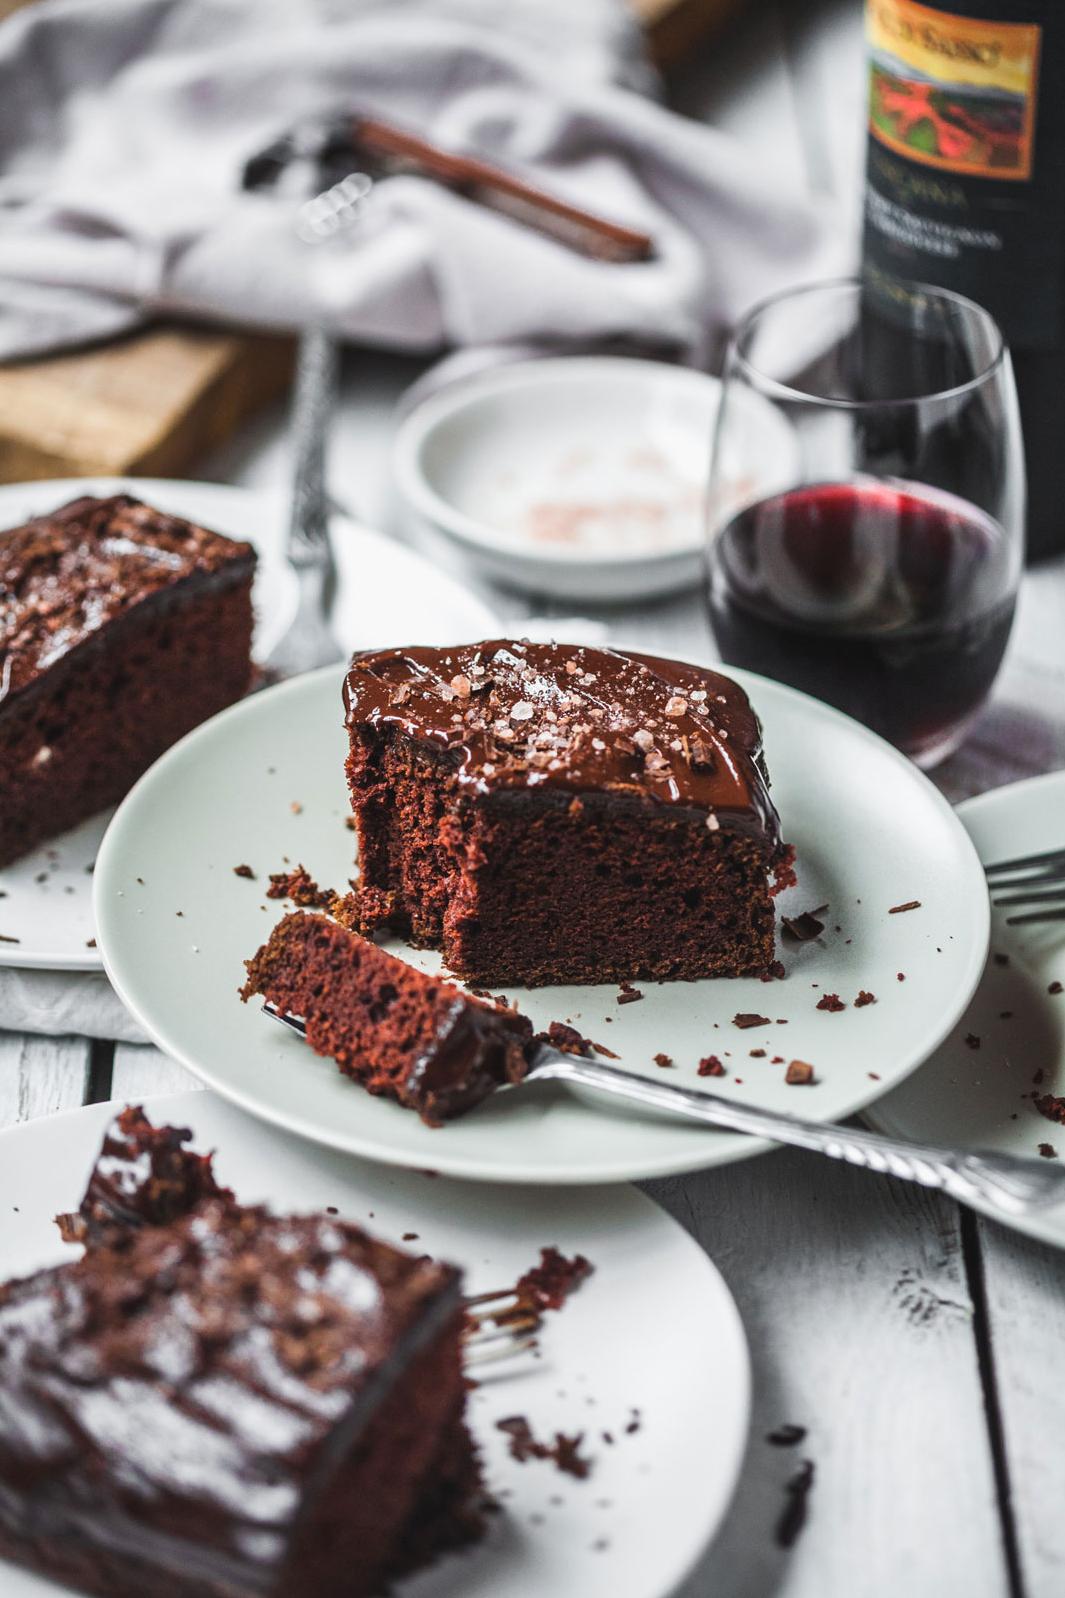  Give your taste buds the royal treatment with this wine cake.